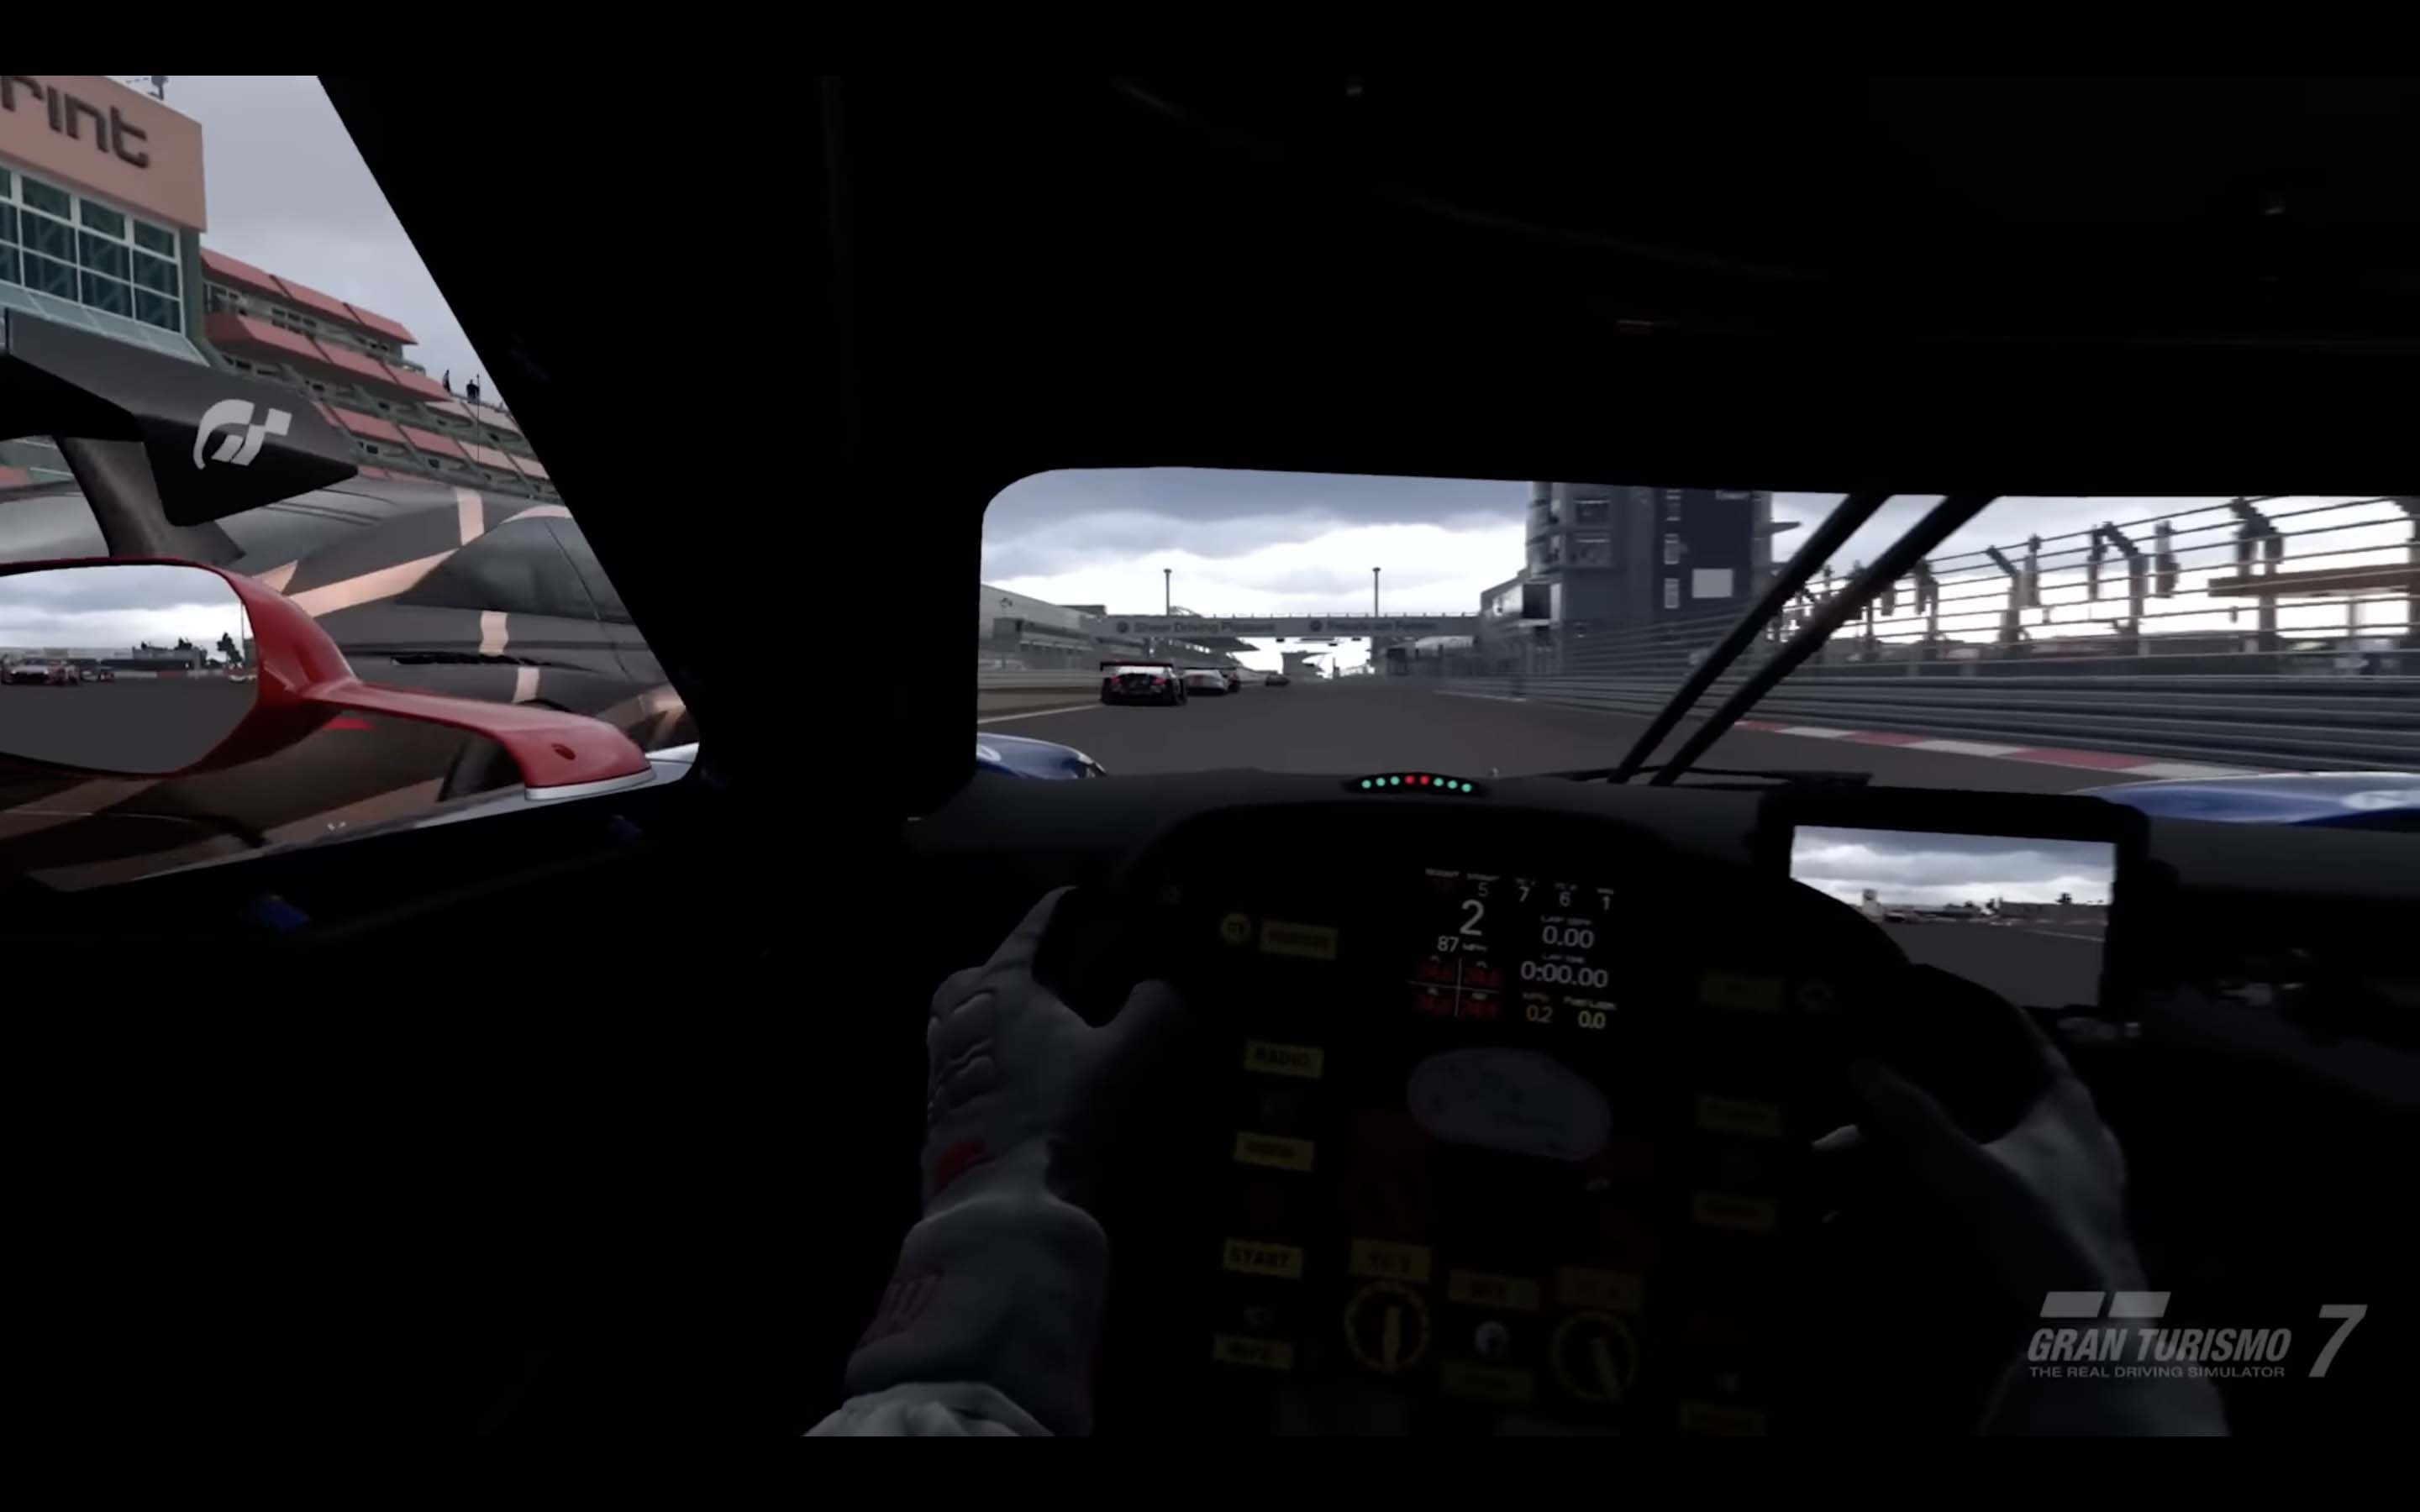 Gran Turismo 7 VR - Monoscopic VR Demo - What stereo VR could look